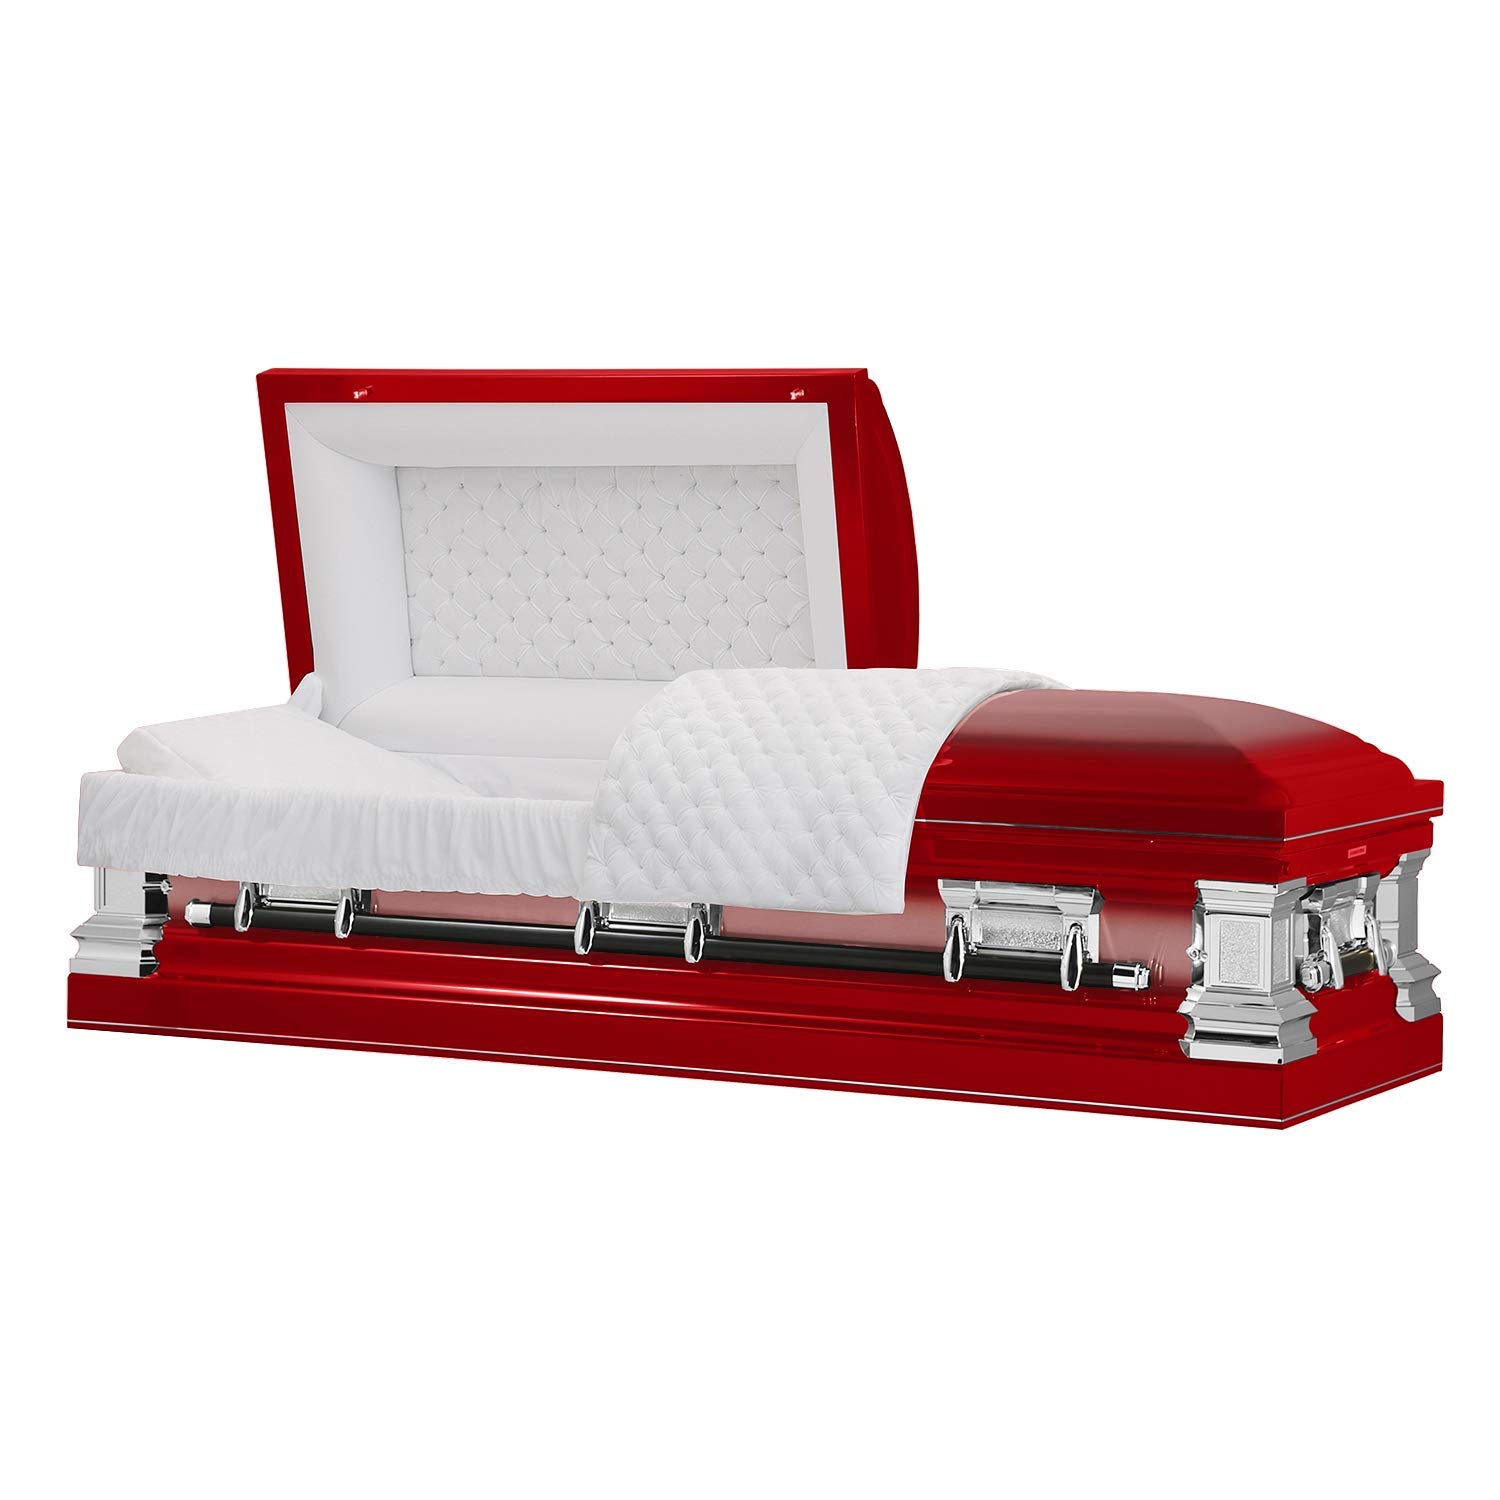 Titan Casket Era Series Stainless Steel Casket (Red) Handcrafted Funeral Casket - Red Finish with White Crepe Interior